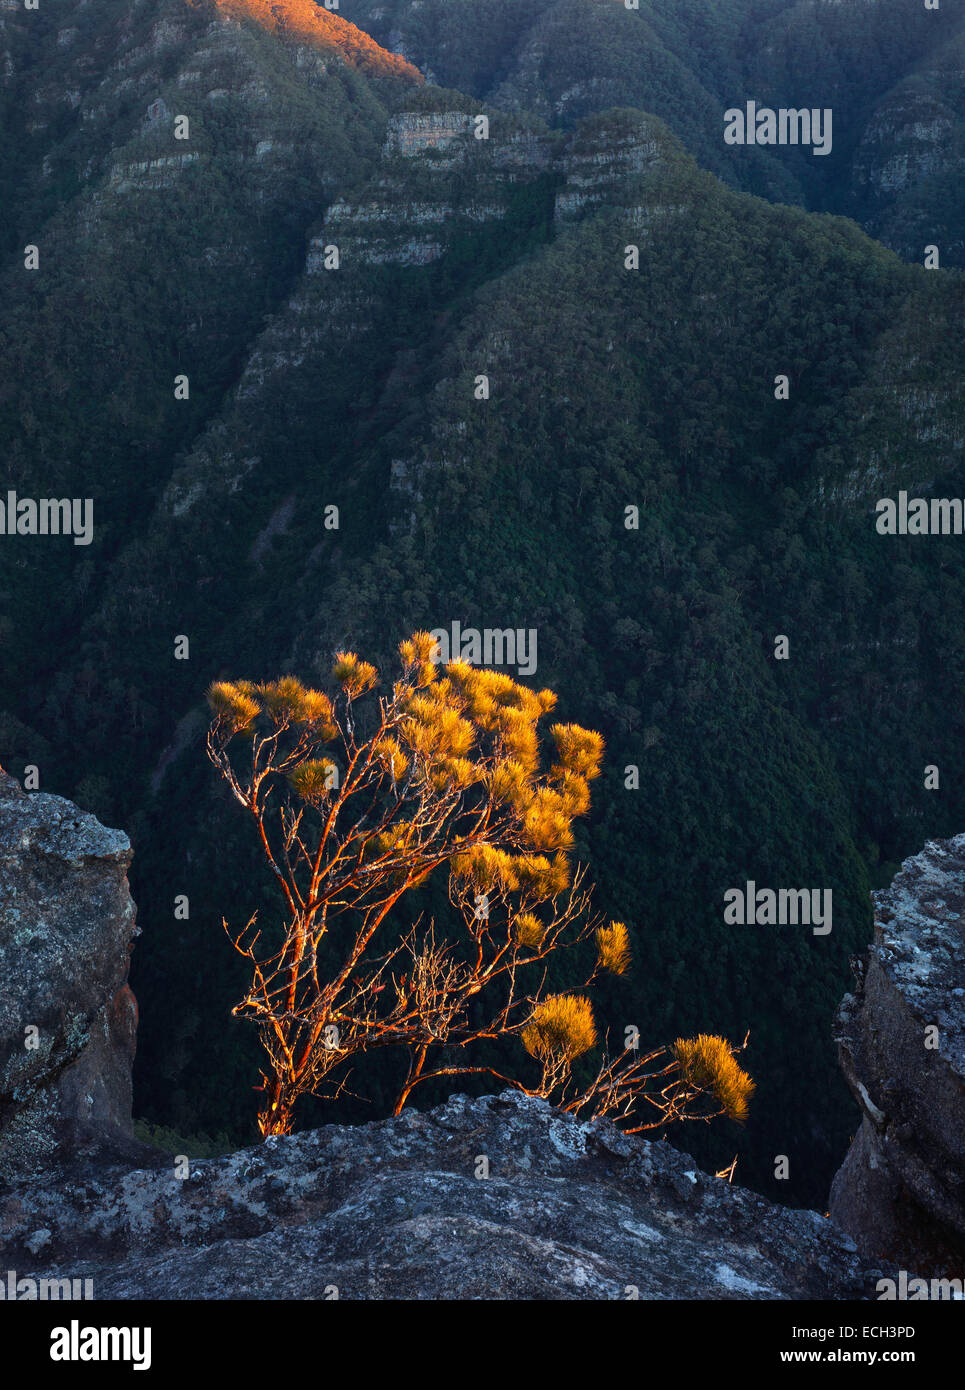 First light catches an Allocasuarina perched on a cliff edge overlooking Thurat Spires, Kanangra Boyd National park, Australia Stock Photo